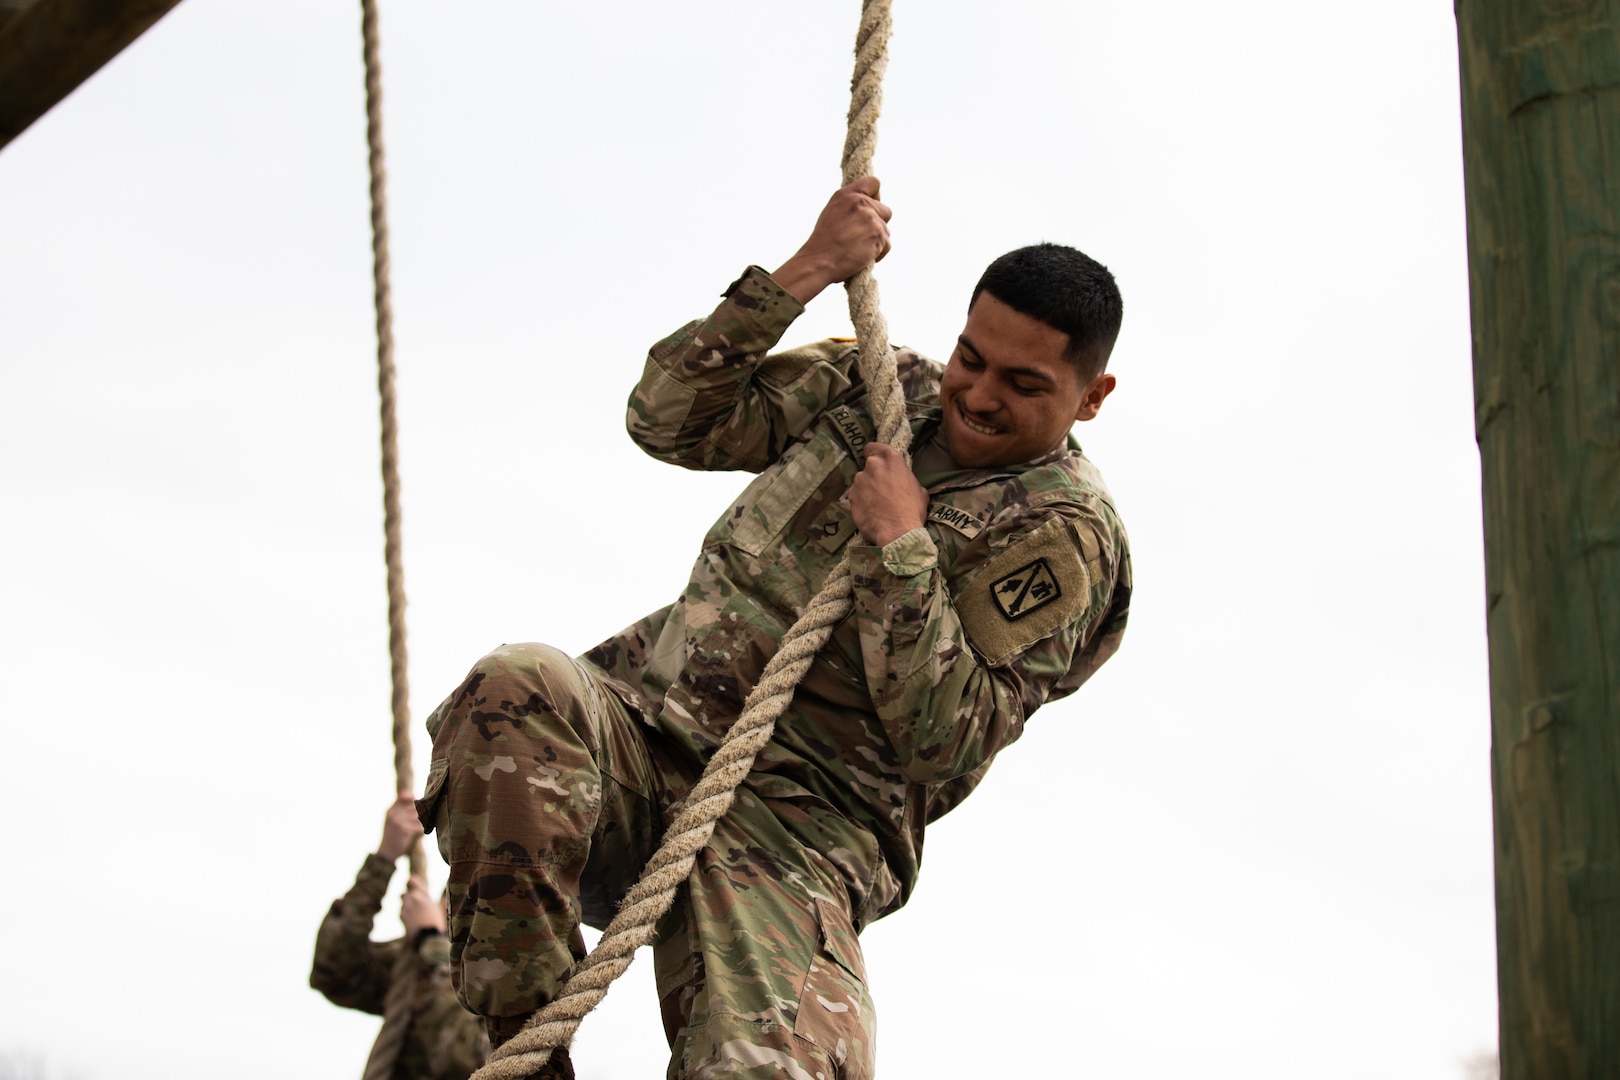 Pfc. Mario Delahoya, a member of 45th Field Artillery Brigade, Oklahoma Army National Guard, climbs a rope during the obstacle course event of the Best Warrior Competition at Camp Gruber Training Center, Oklahoma, March 5, 2022. The annual three-day event brought together Soldiers to test their proficiency in a variety of warrior tasks and drills.